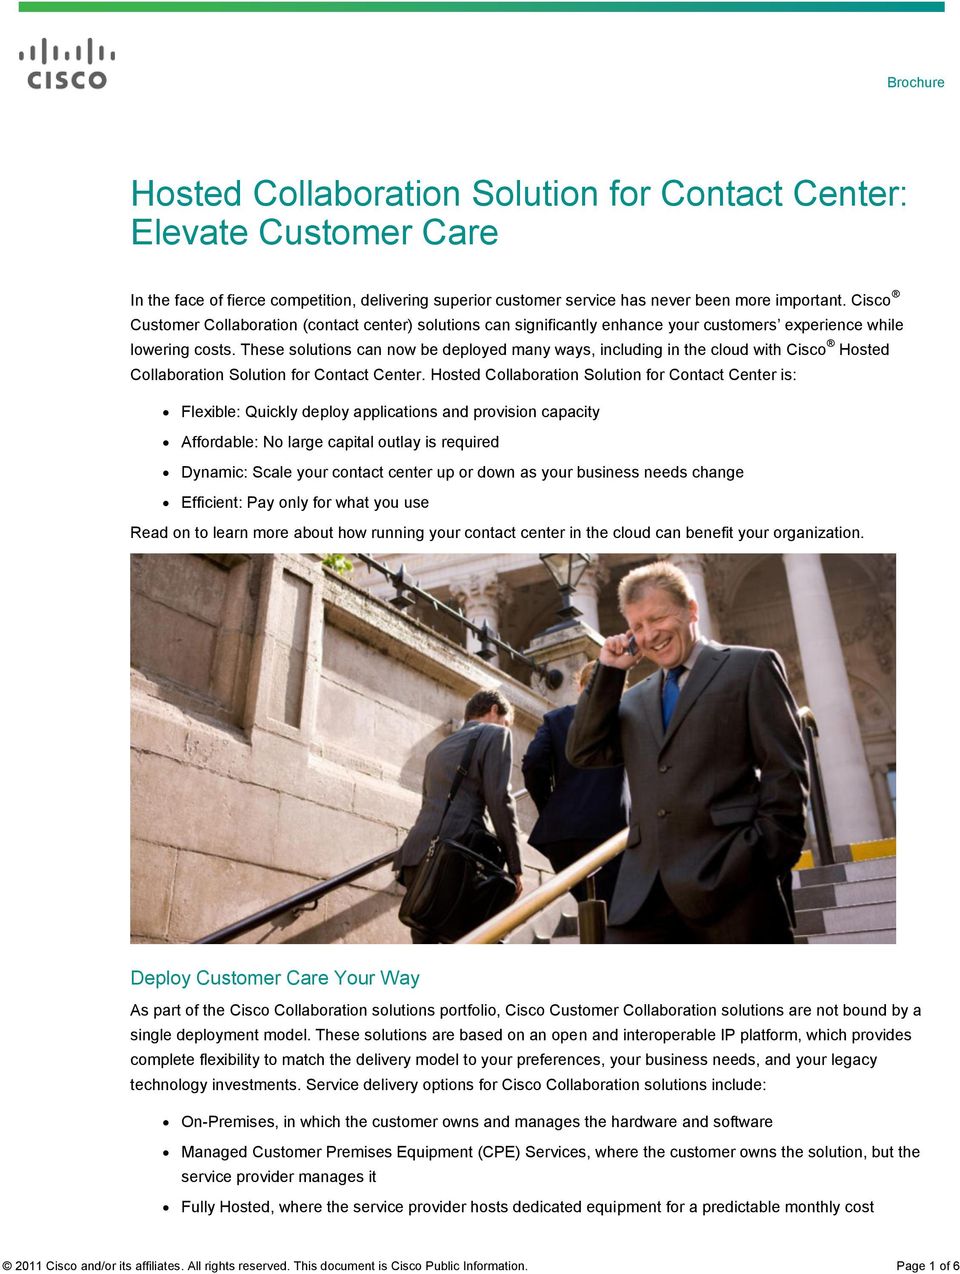 These solutions can now be deployed many ways, including in the cloud with Cisco Hosted Collaboration Solution for Contact Center.